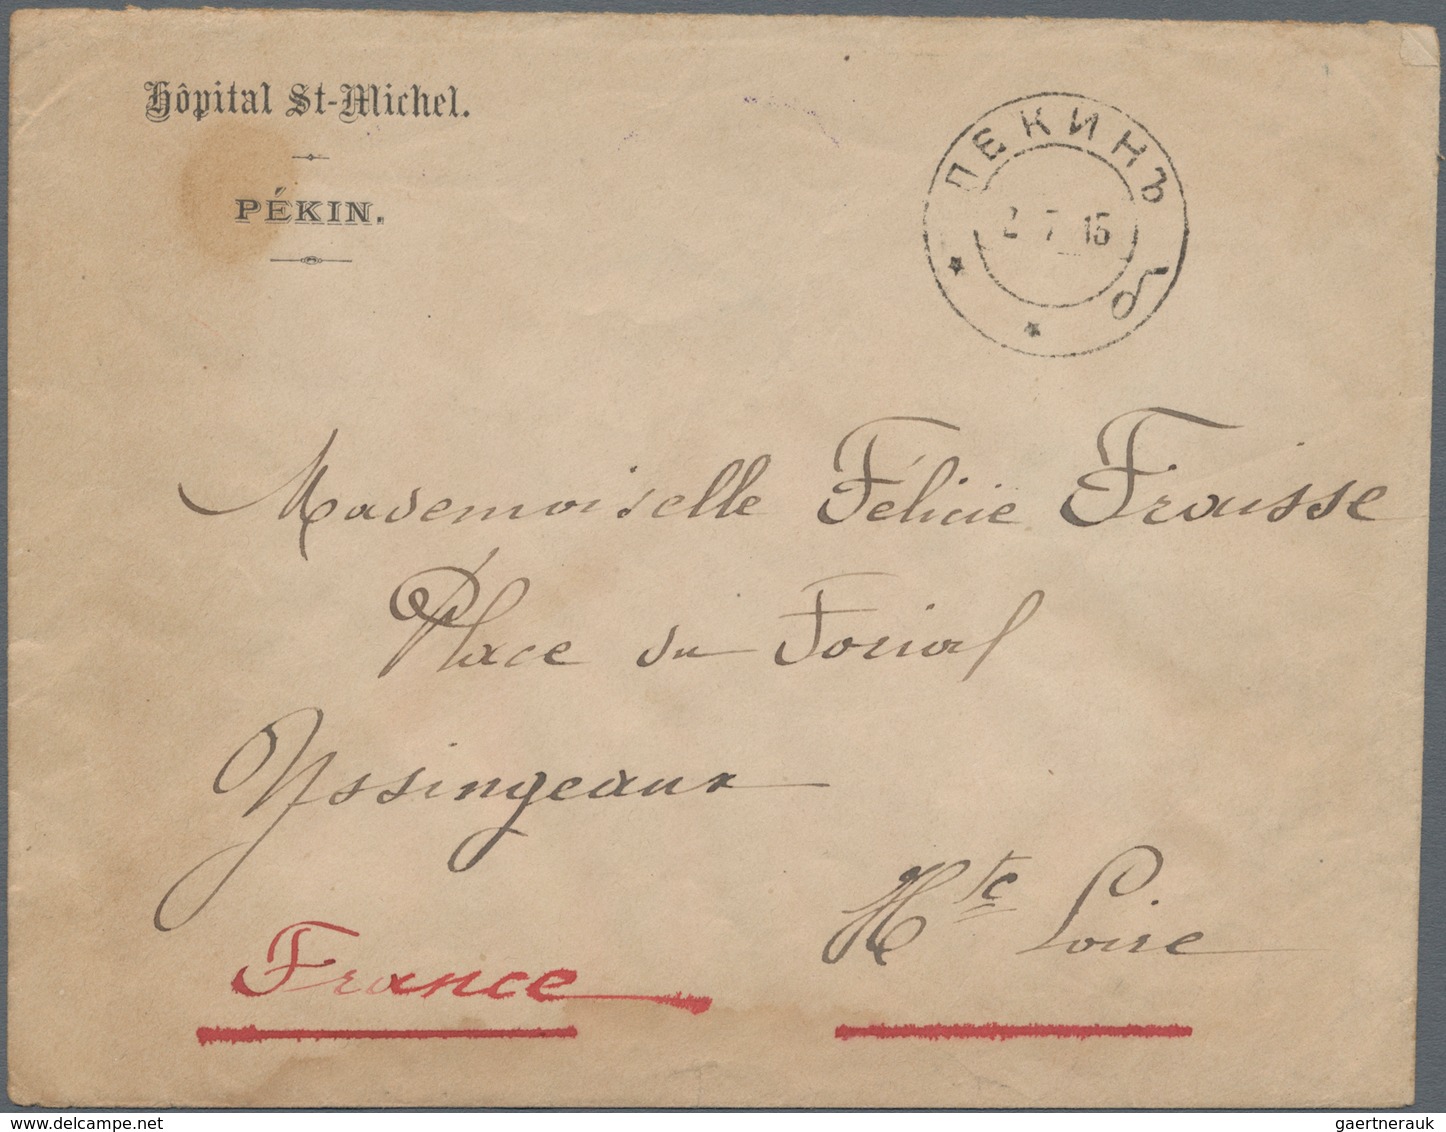 Russische Post In China: 1910, 1 K., 2 K. And 7 K. Tied "PEKING 2.7.15" To Reverse Of Cover (St. Mic - China